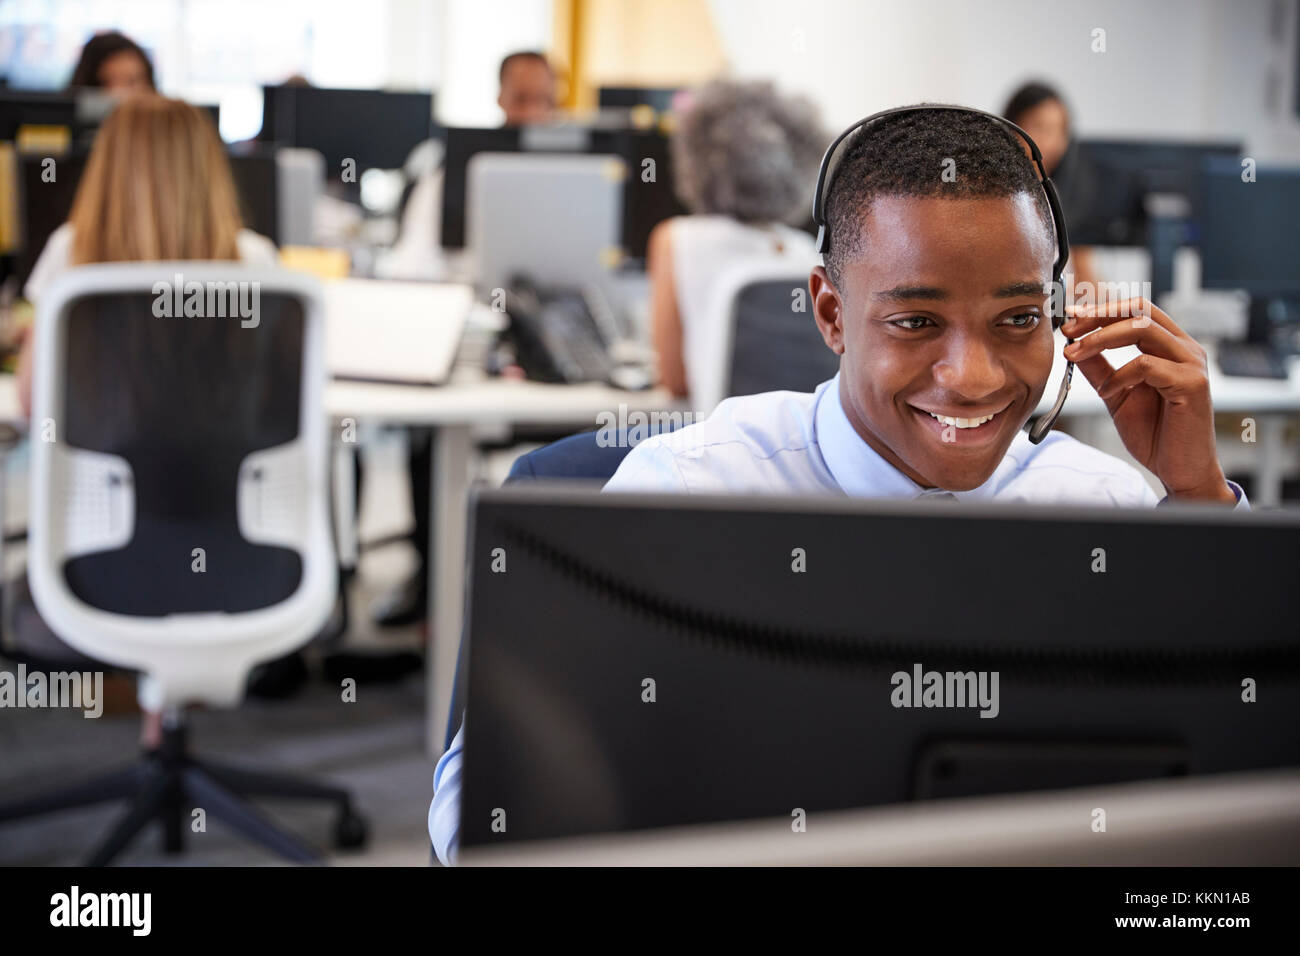 Young man working at computer with headset in busy office Stock Photo